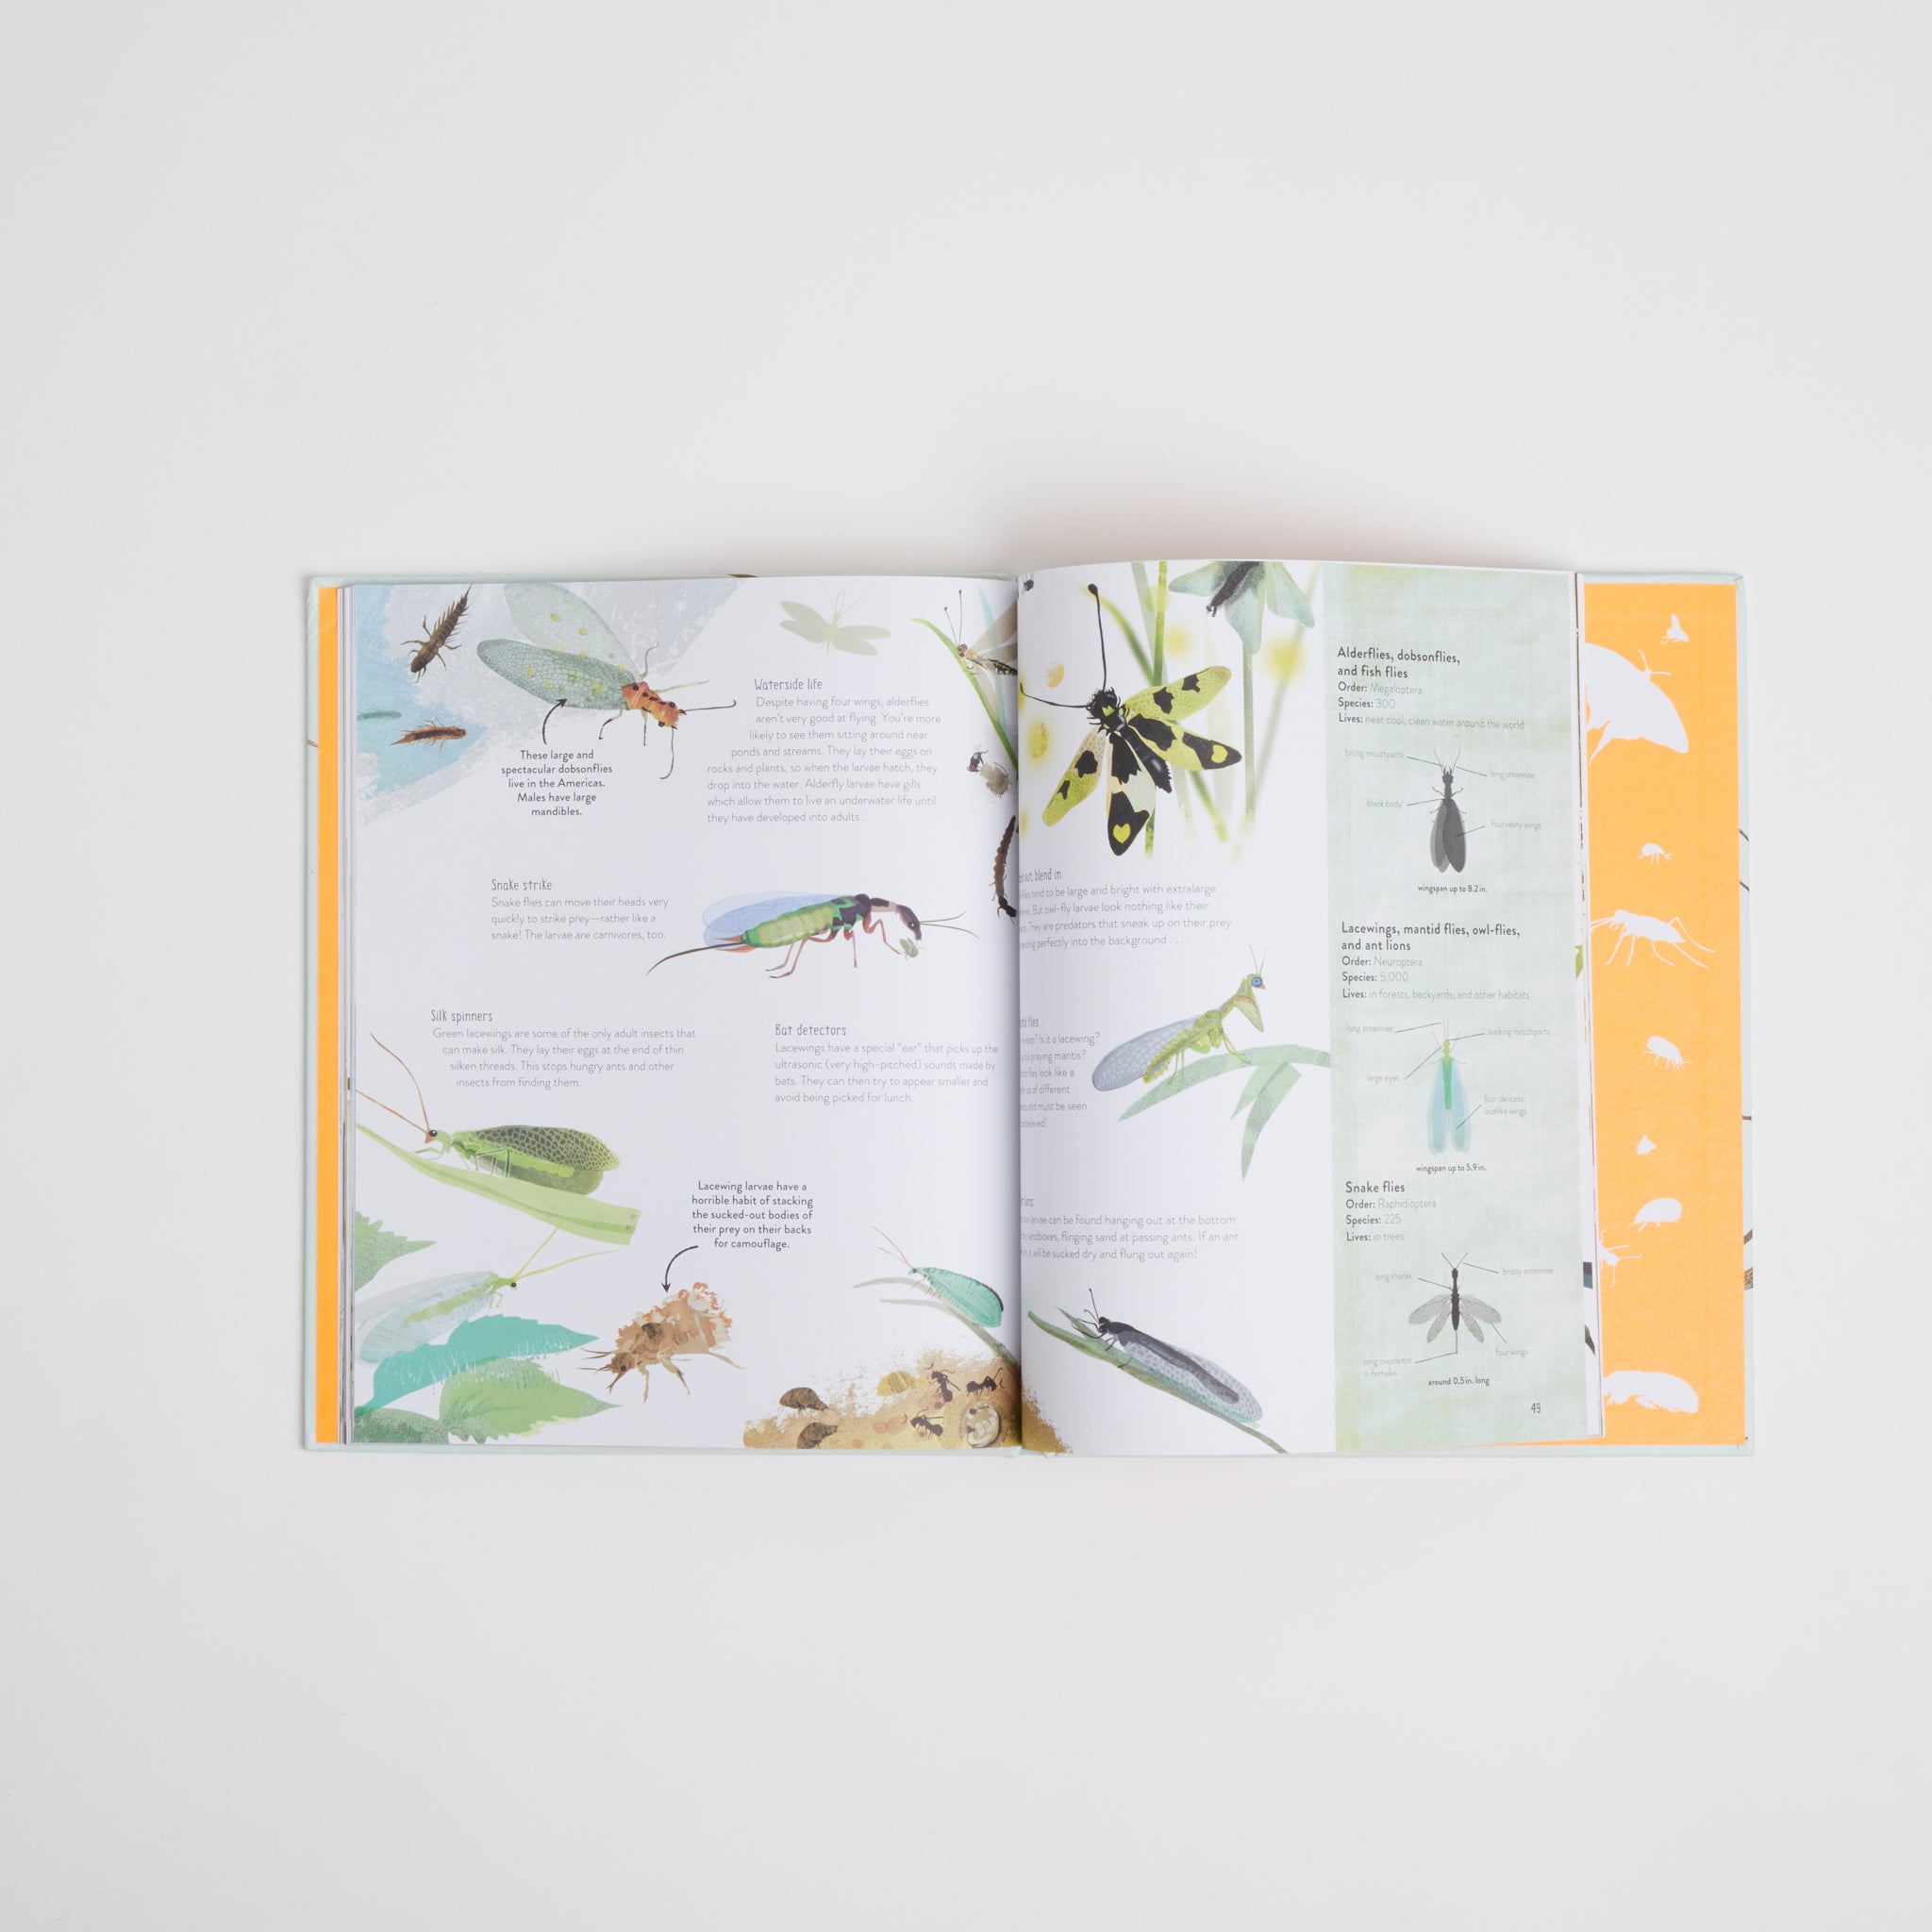 Interior pages from One Million Insects